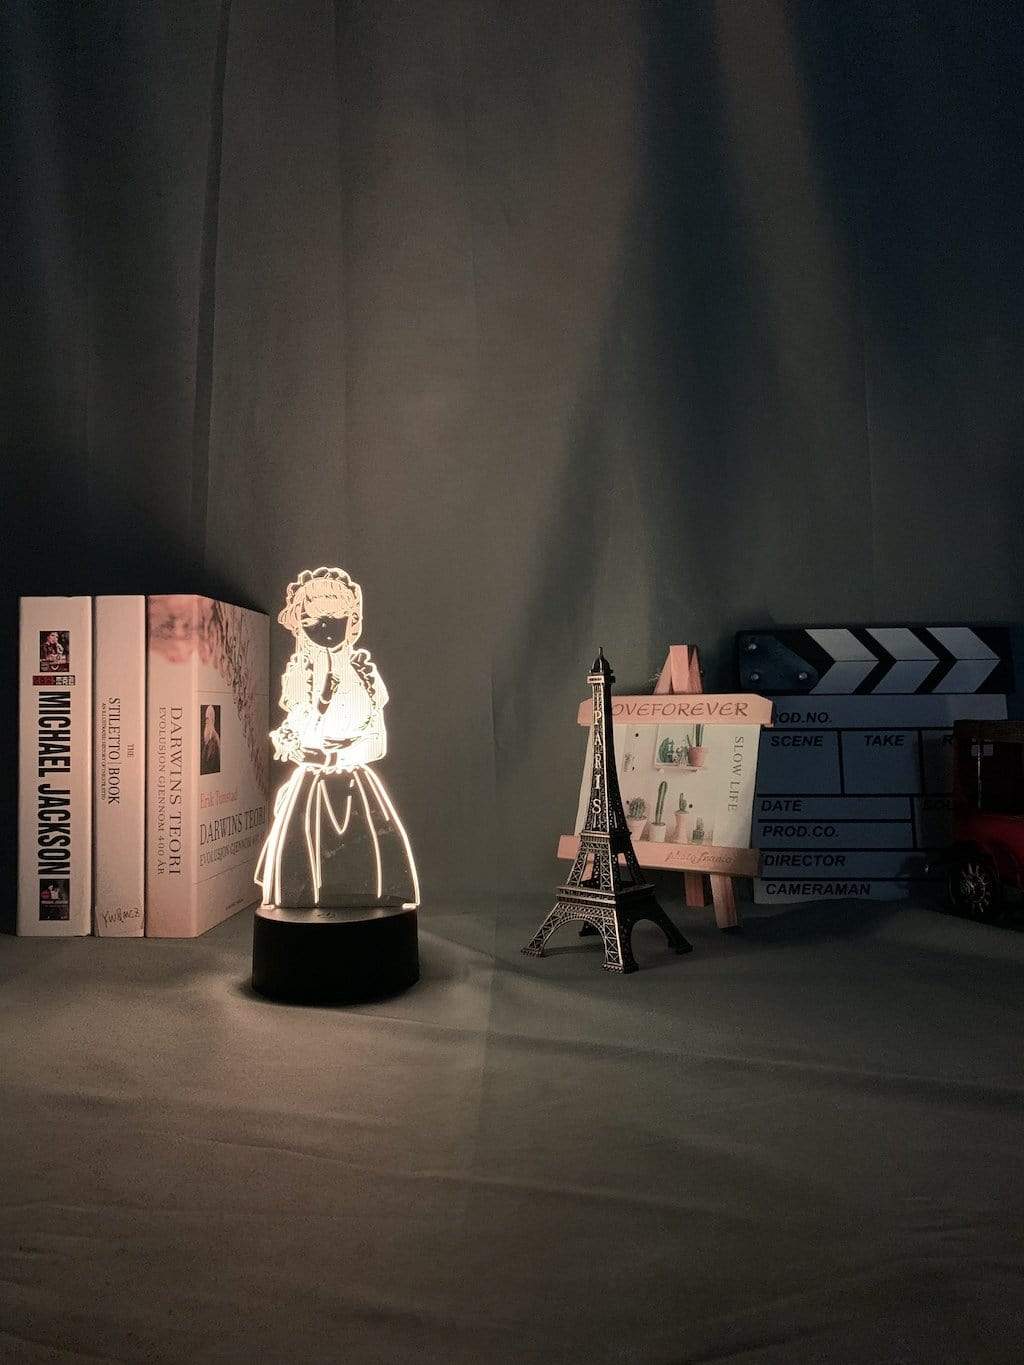 Lampe Komi Can't Communicate Anime Table Lamp for Kids Bedroom Decoration lampe led 3D